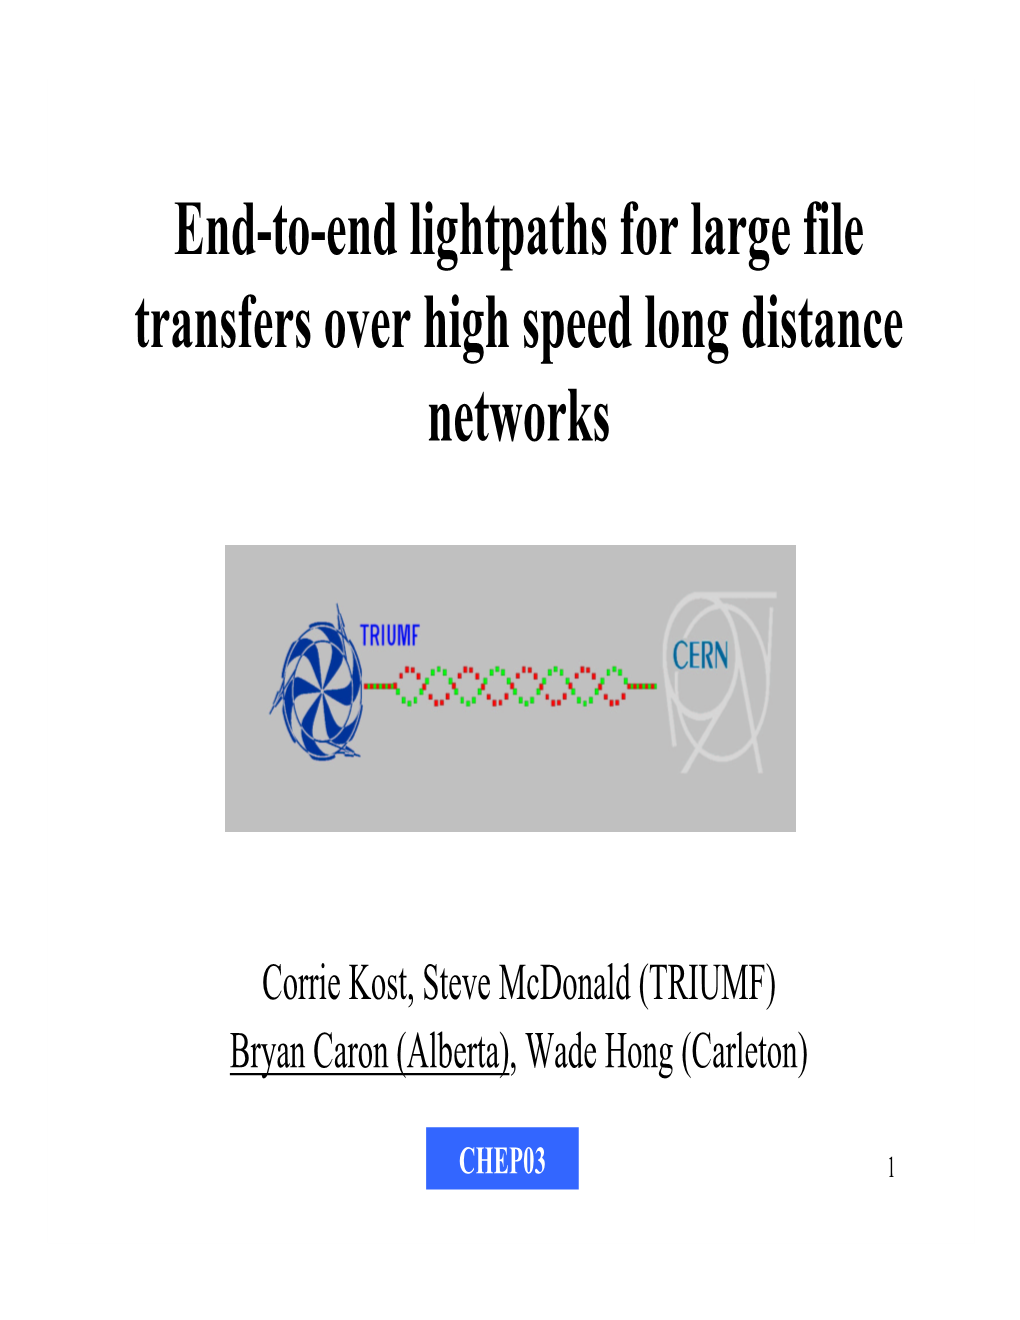 End-To-End Lightpaths for Large File Transfers Over High Speed Long Distance Networks